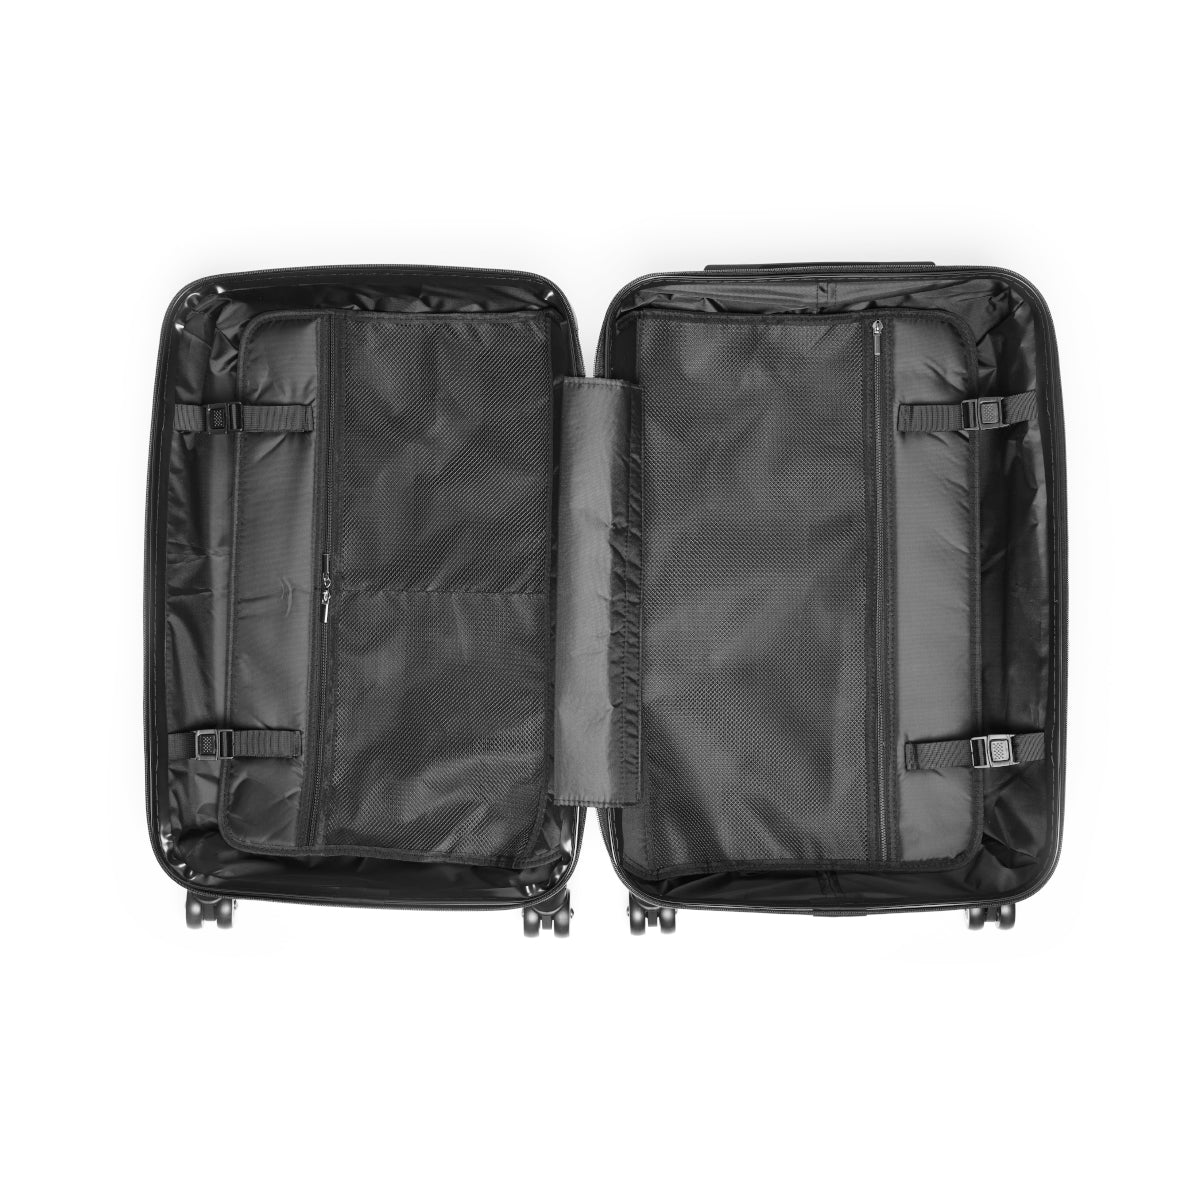 Getrott Duran Duran Rio Black Cabin Suitcase Inner Pockets Extended Storage Adjustable Telescopic Handle Inner Pockets Double wheeled Polycarbonate Hard-shell Built-in Lock